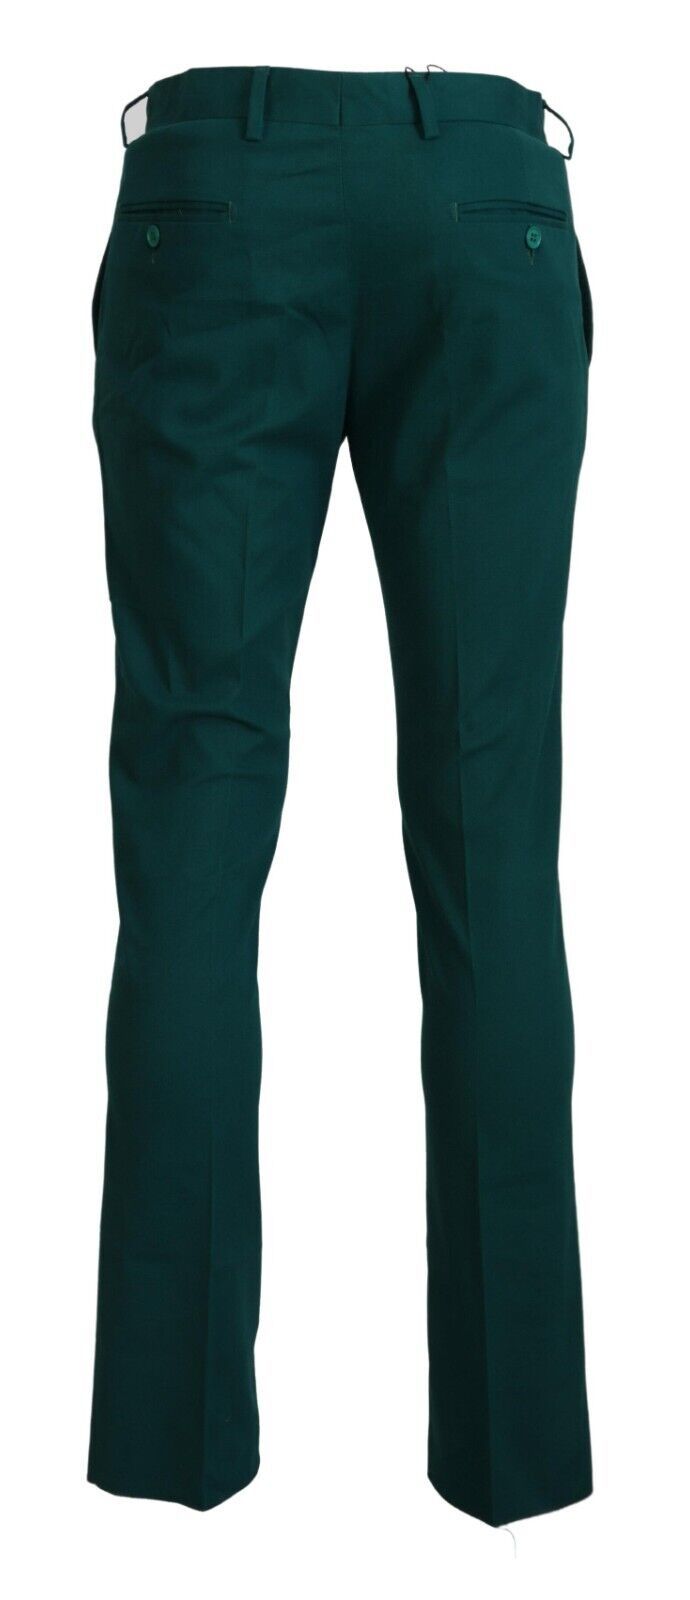 BENCIVENGA Green Straight Fit  Formal Trousers Pants